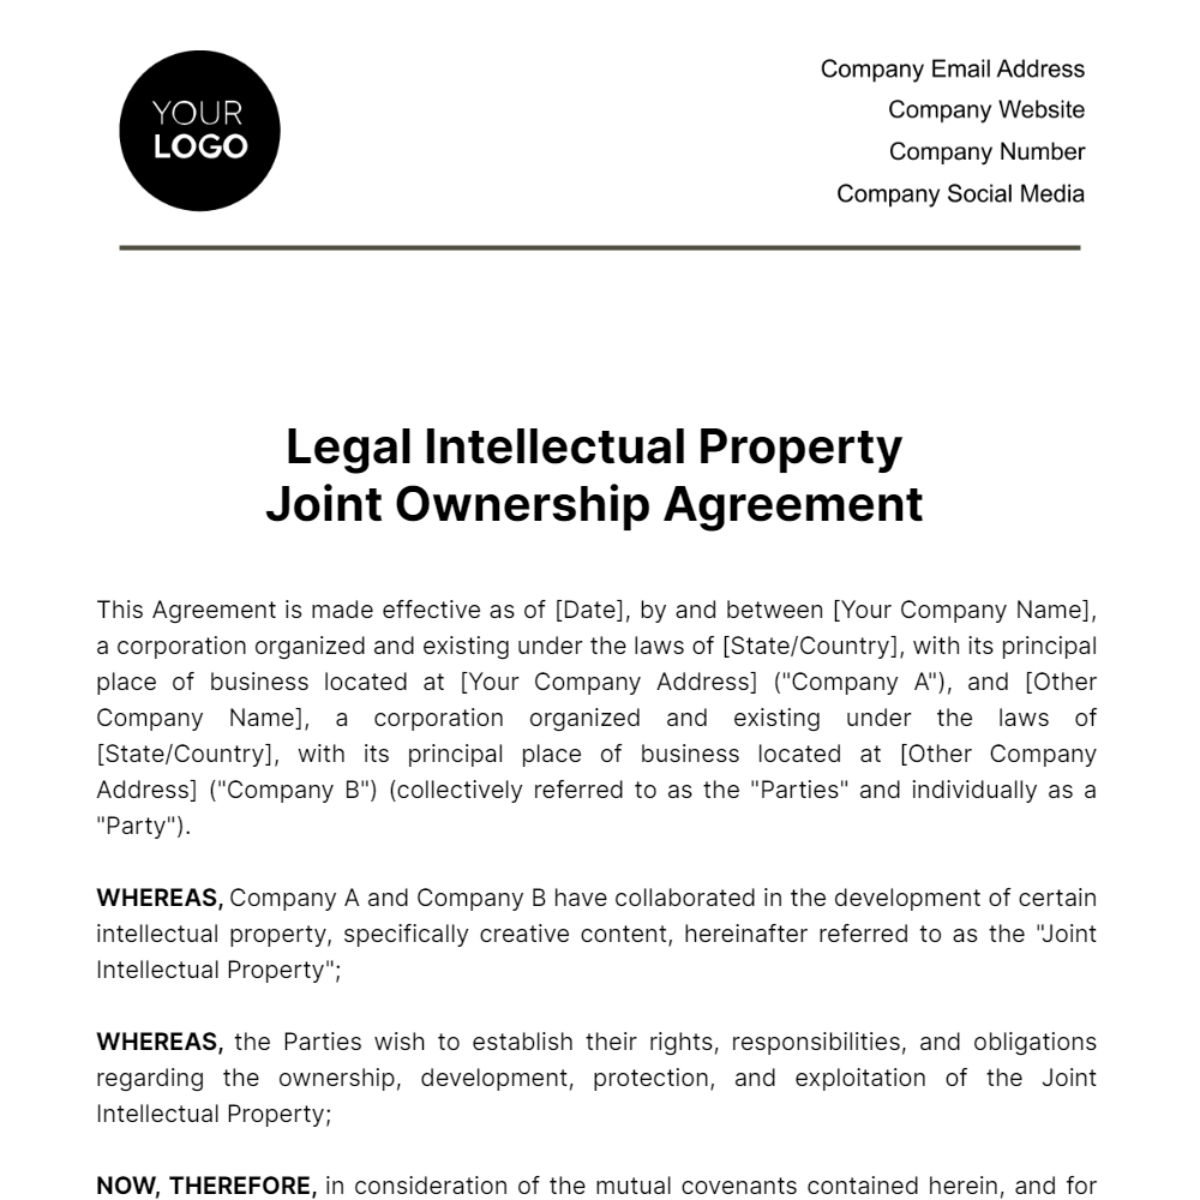 Free Legal Intellectual Property Joint Ownership Agreement Template